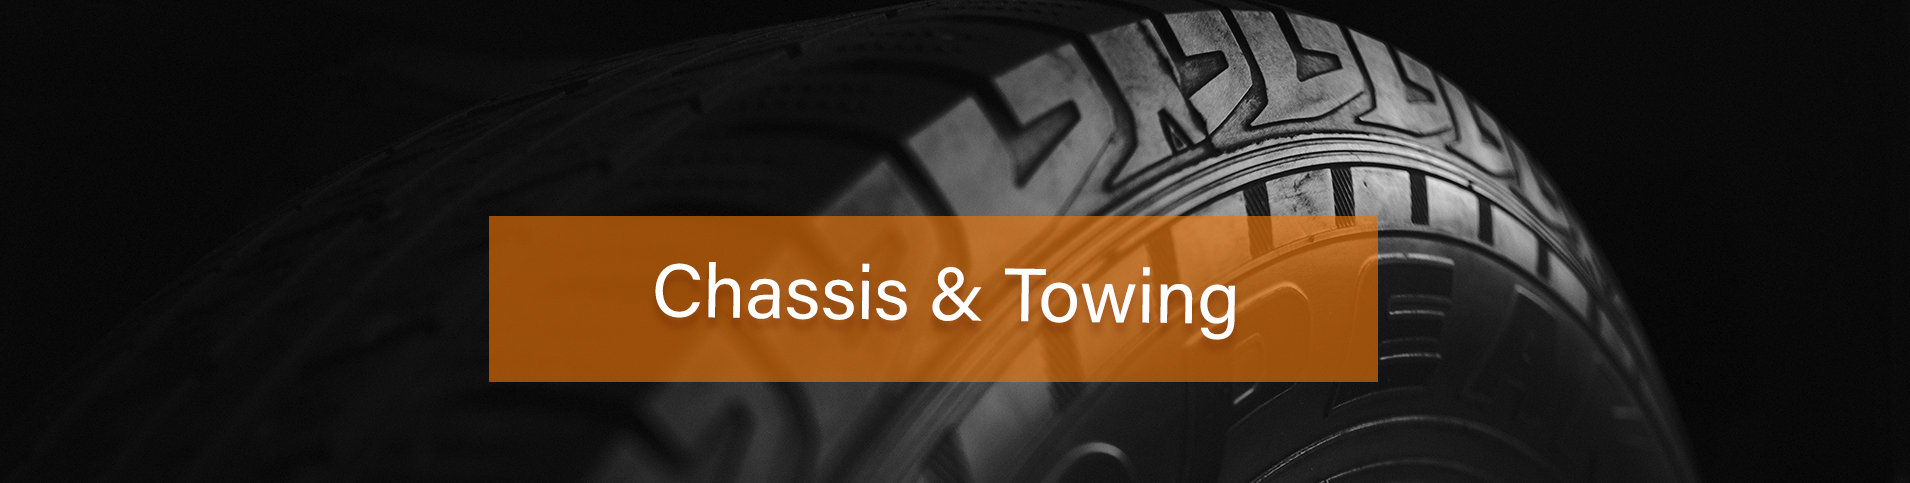 Chassis & Towing